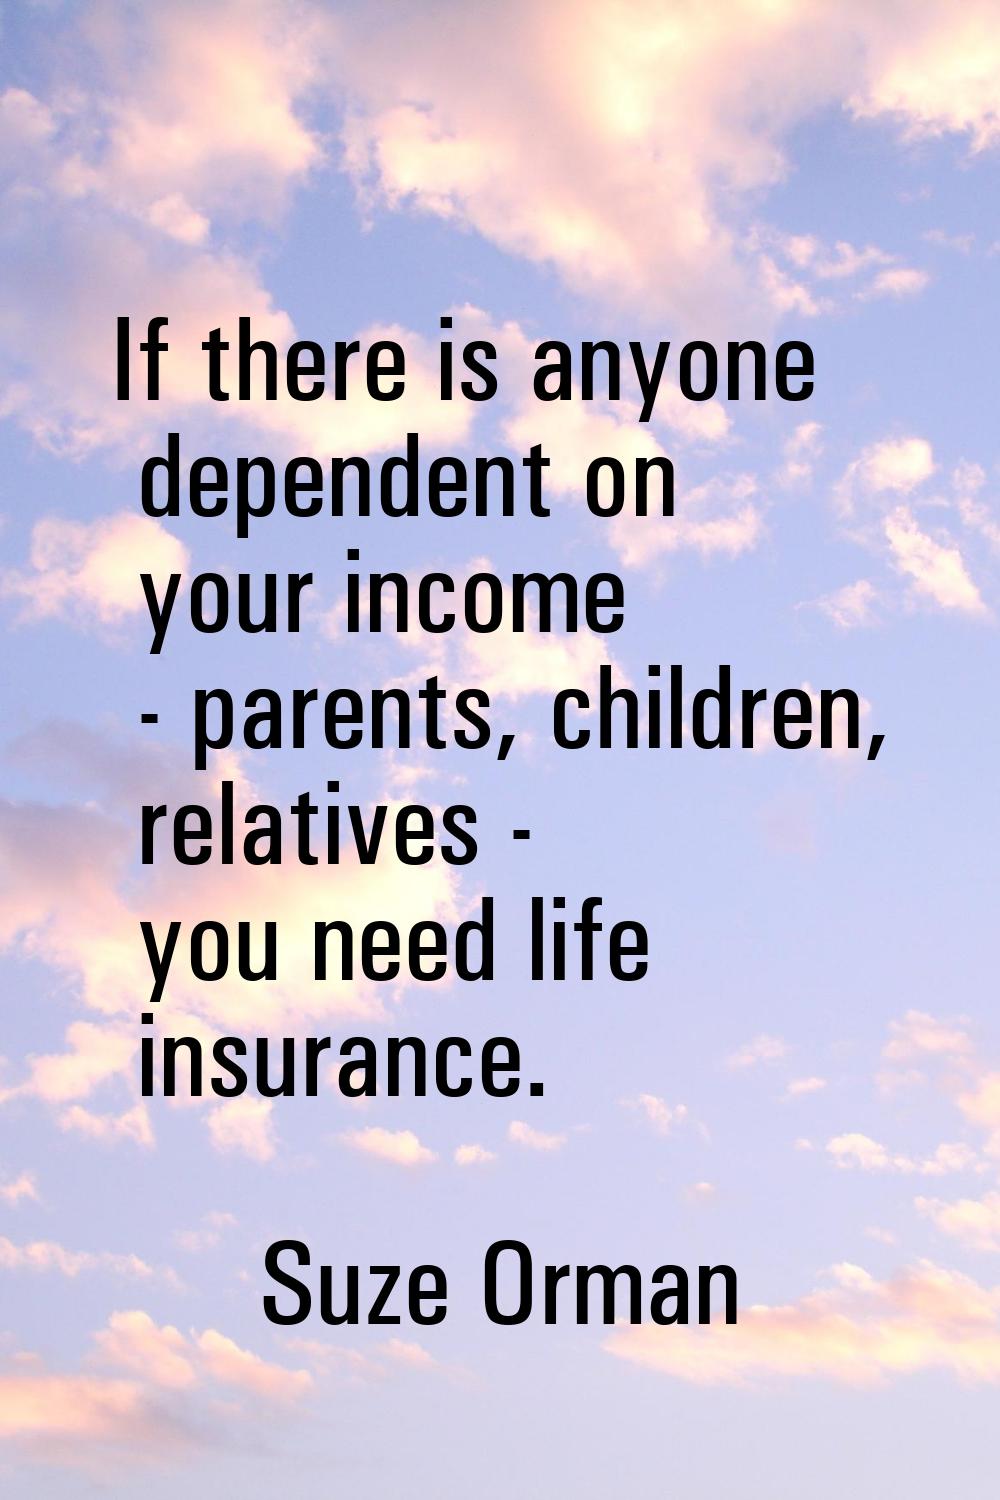 If there is anyone dependent on your income - parents, children, relatives - you need life insuranc